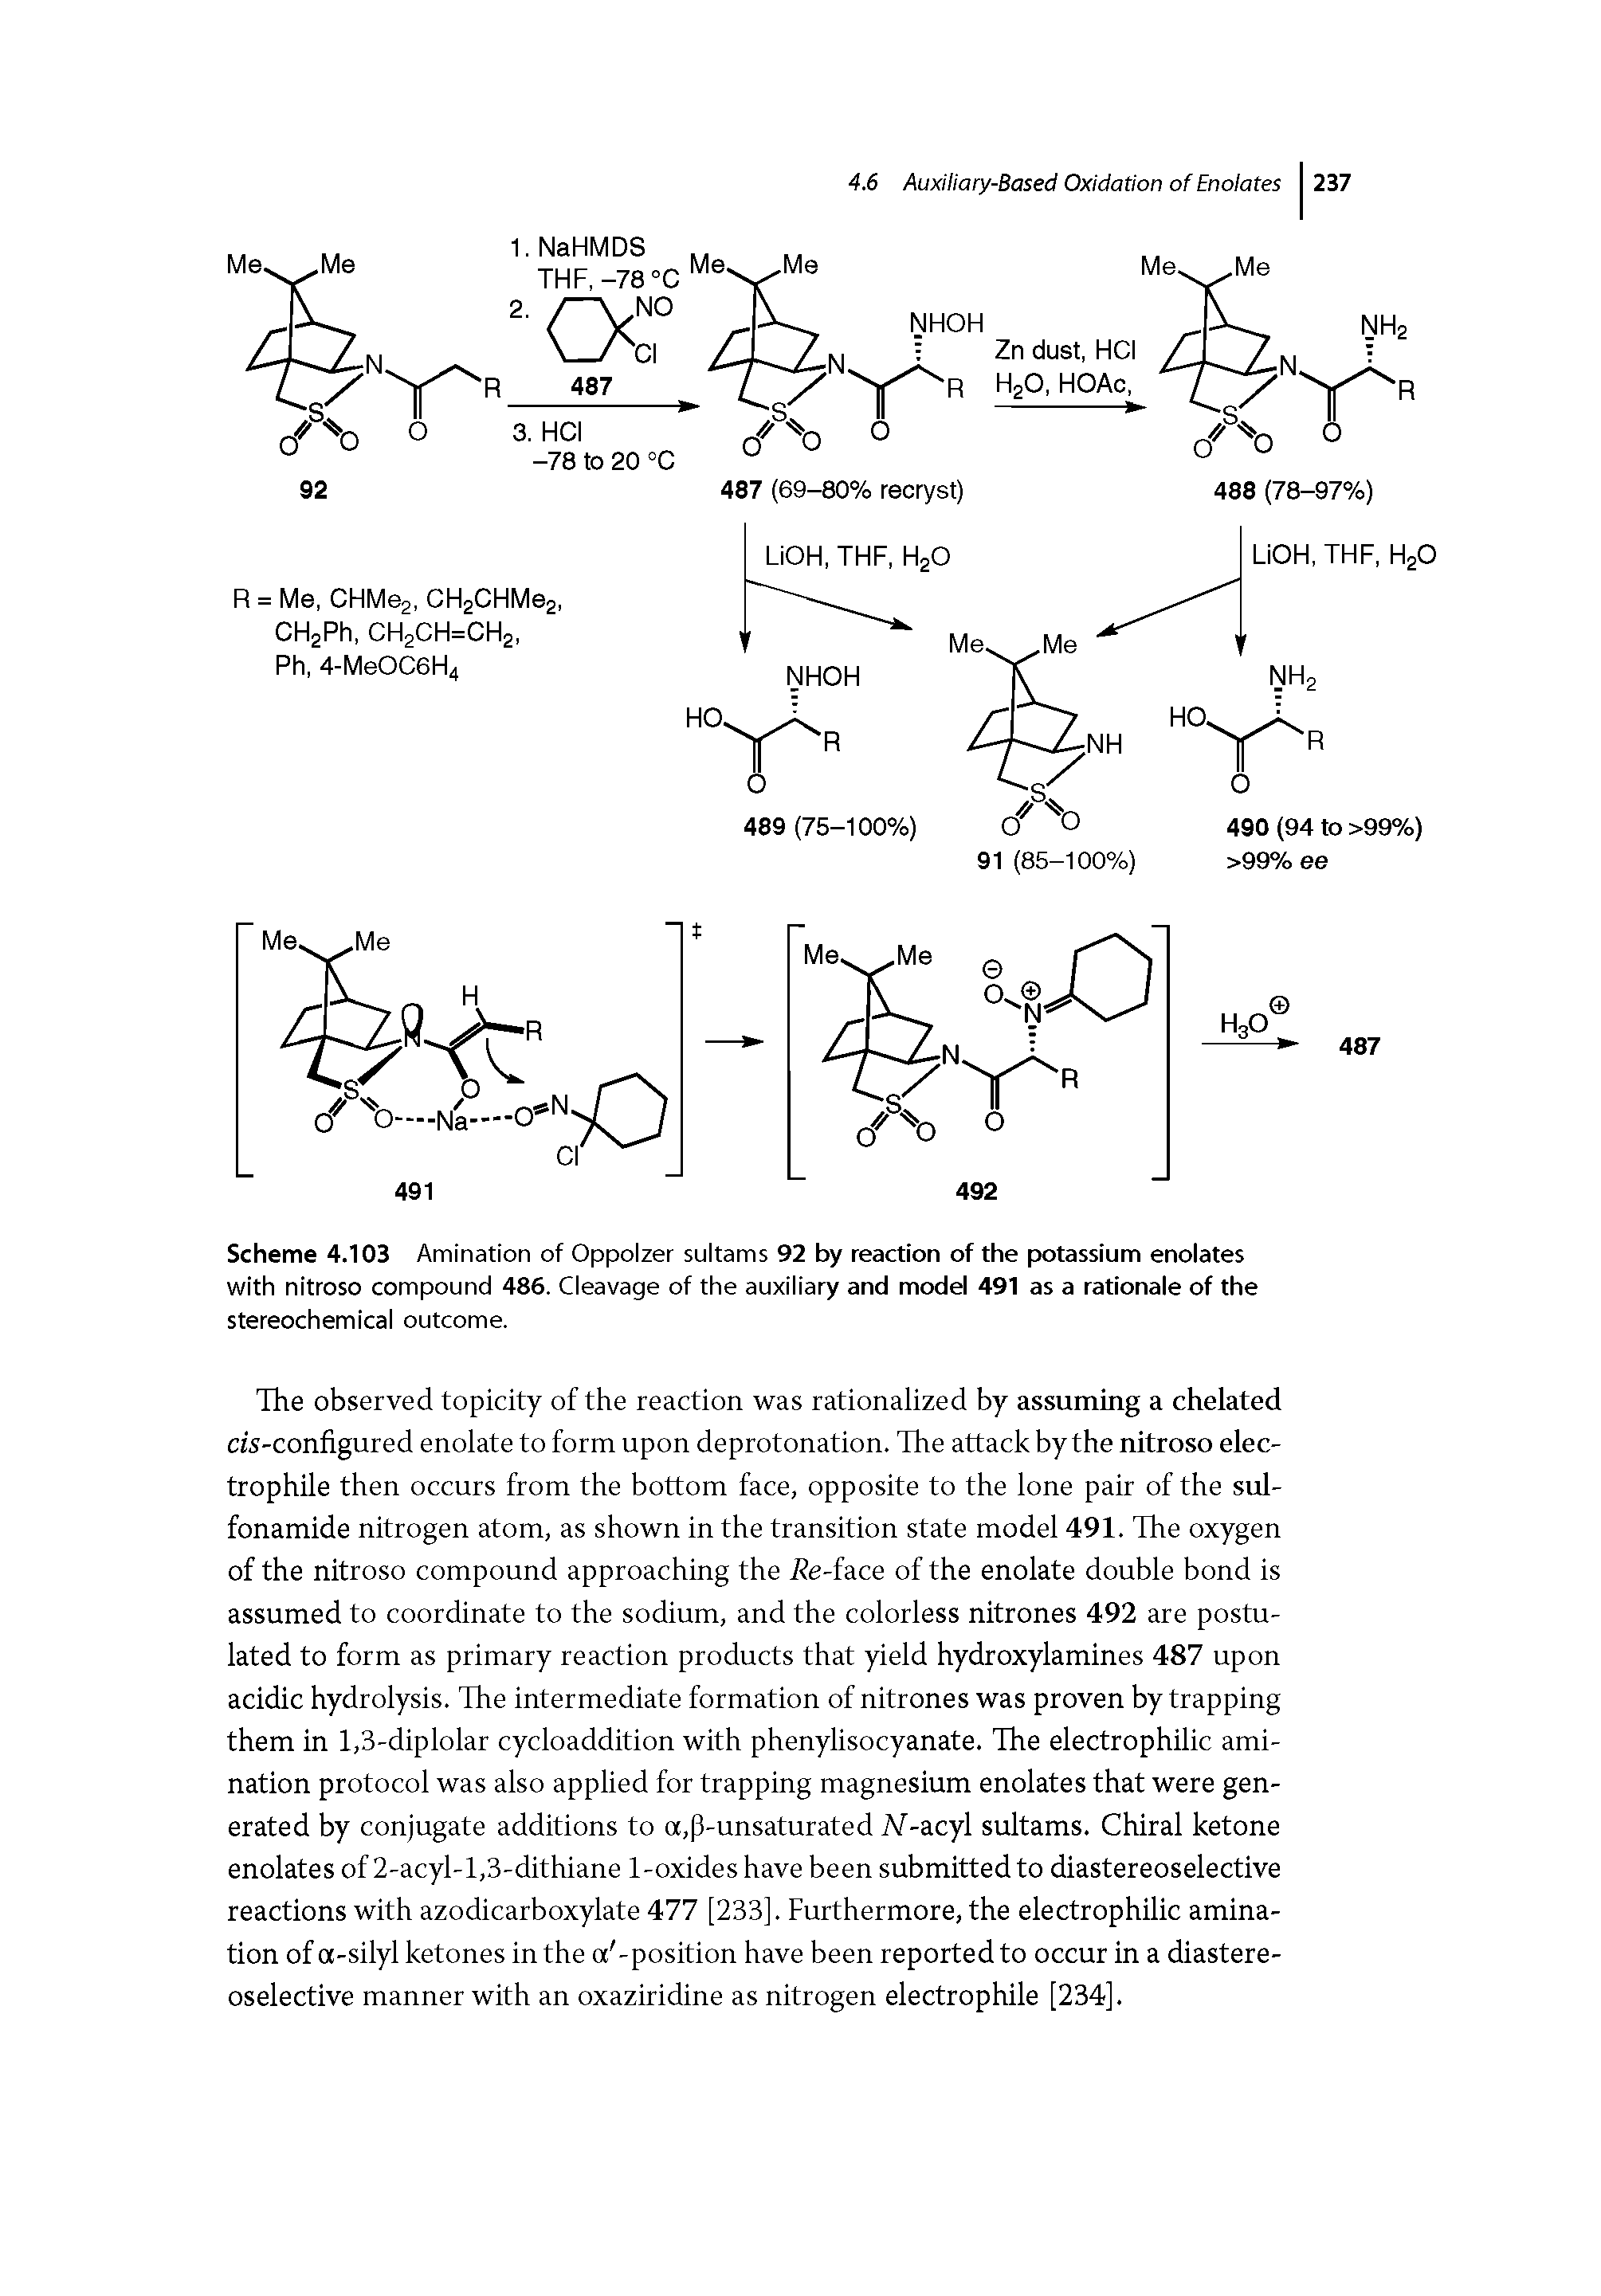 Scheme 4.103 Amination of Oppolzer sultams 92 by reaction of the potassium enolates with nitroso compound 486. Cleavage of the auxiliary and model 491 as a rationale of the stereochemical outcome.